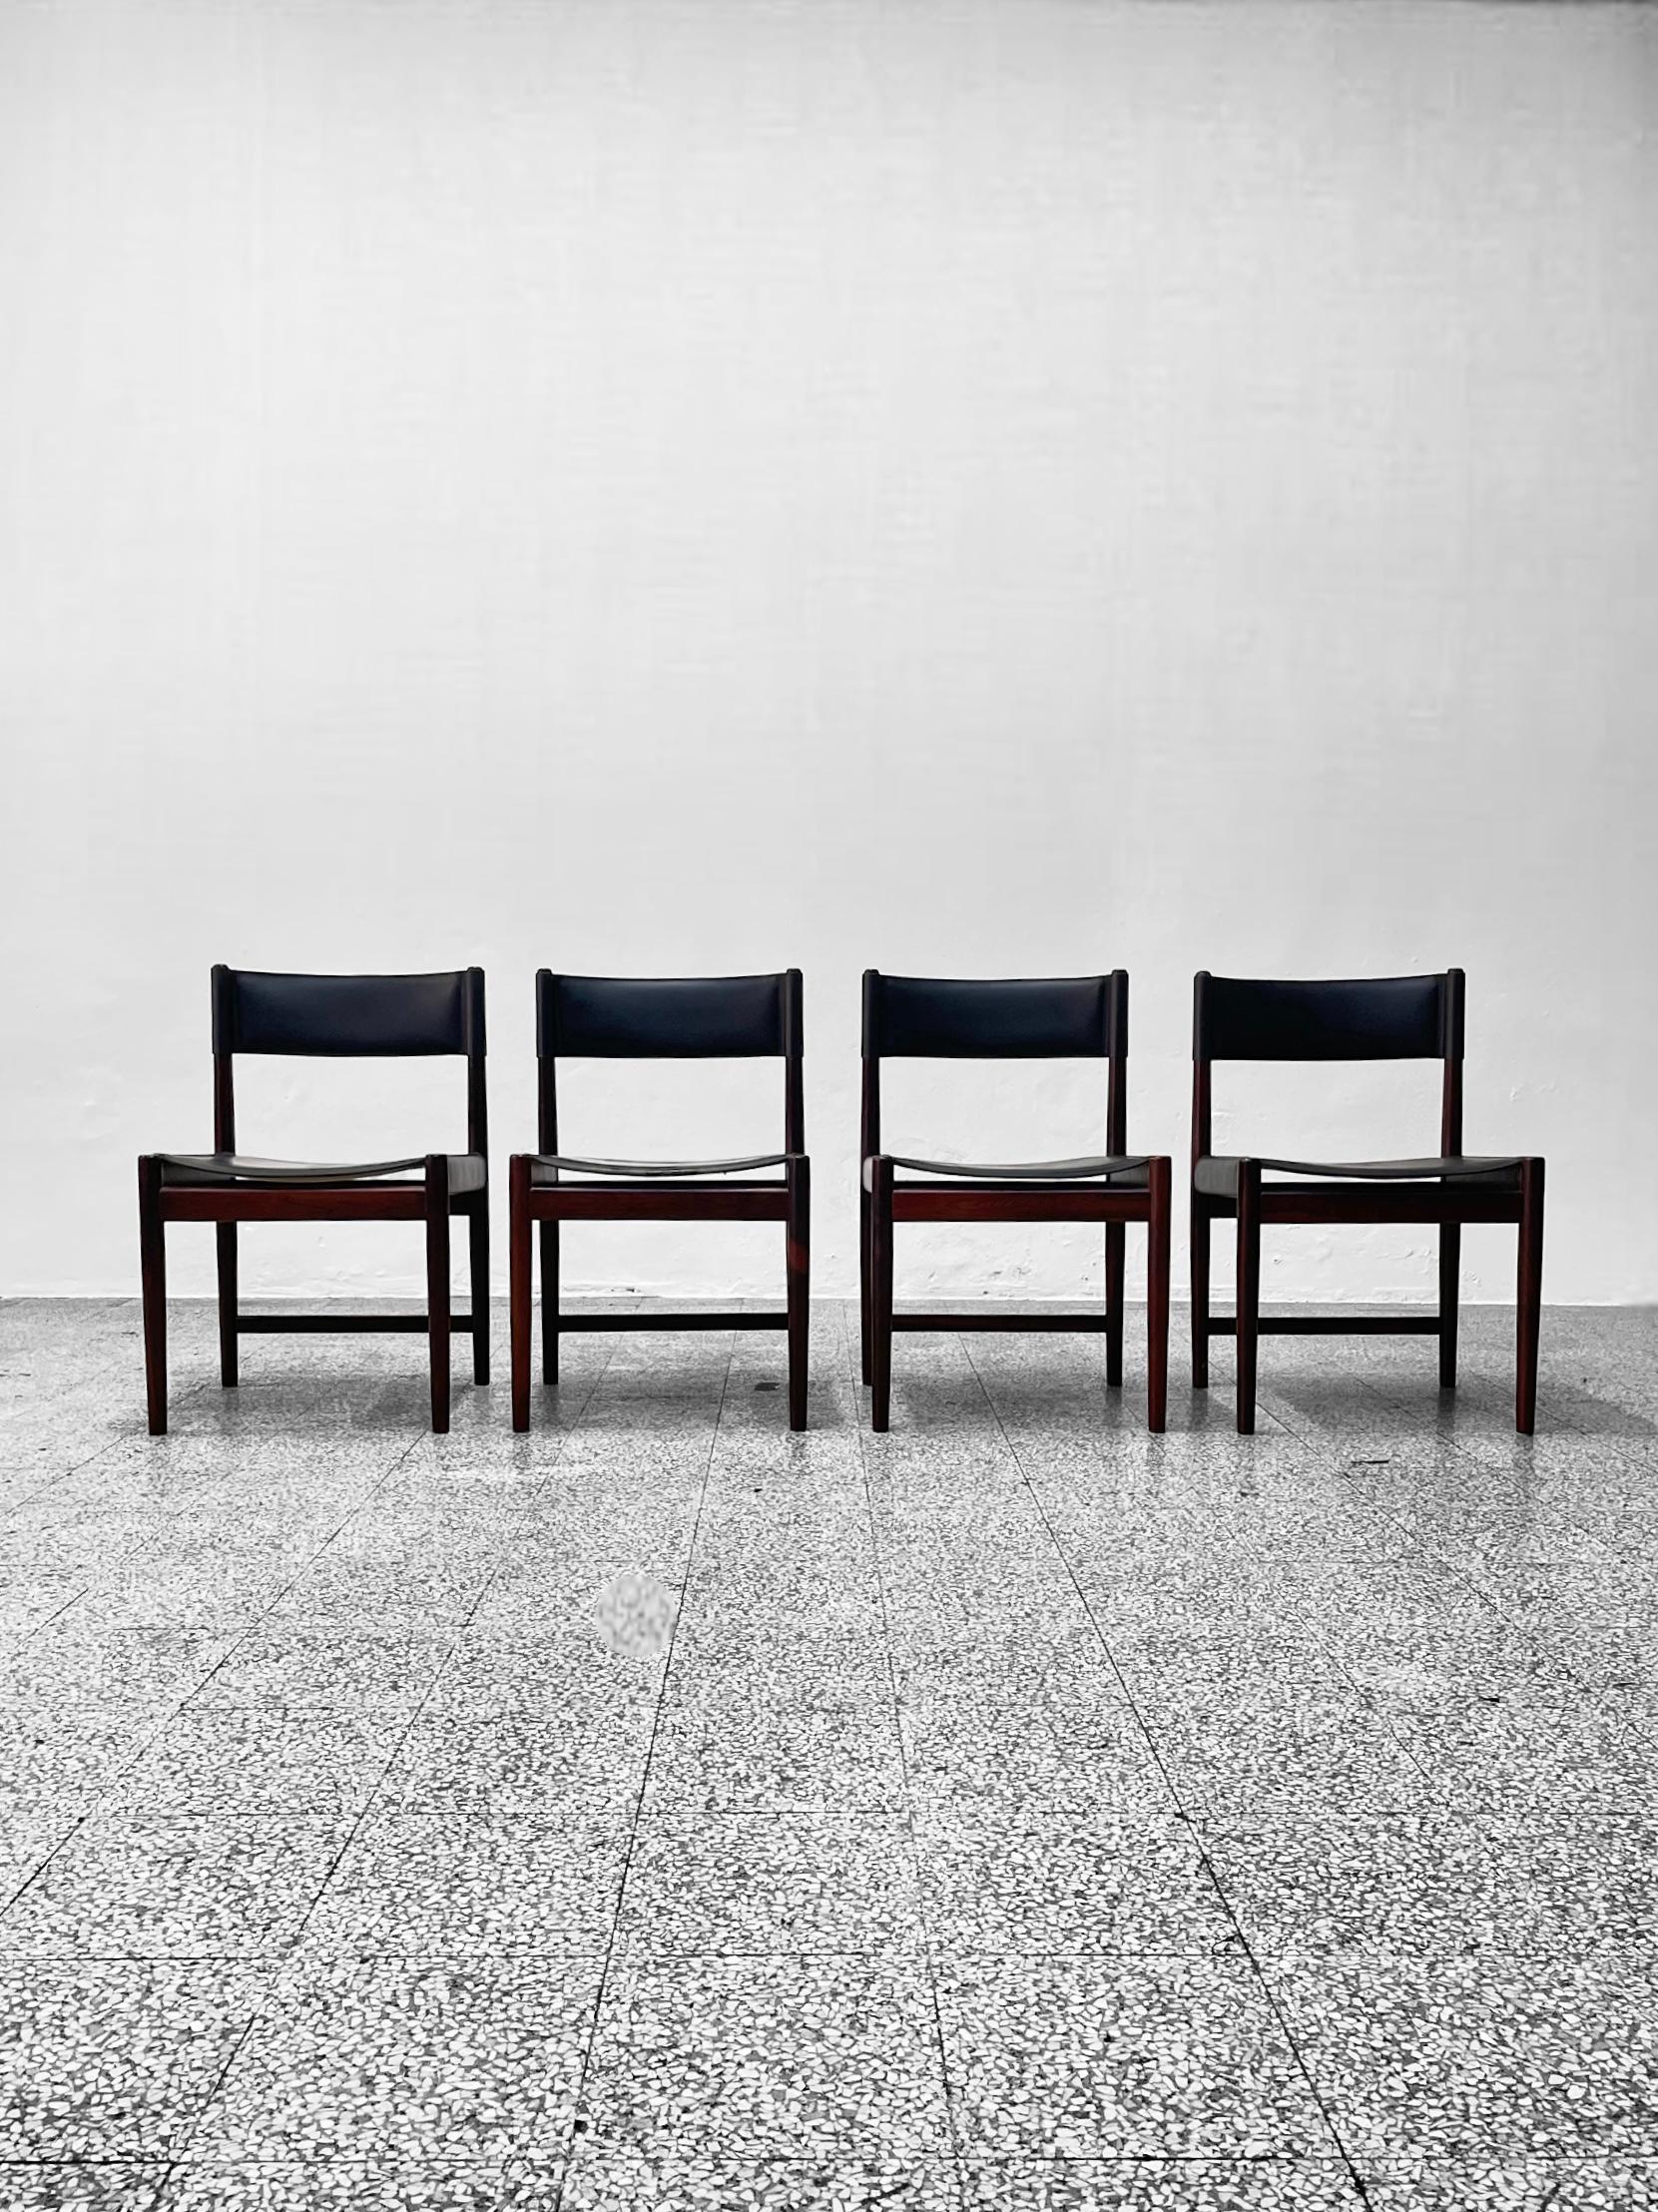 Set of four dining chairs designed by Kurt Østervig for Sibast, 1960s.

Introducing the epitome of Danish design with these stunning dining room chairs by Kurt Østervig. Crafted with the utmost attention to detail and quality, these chairs